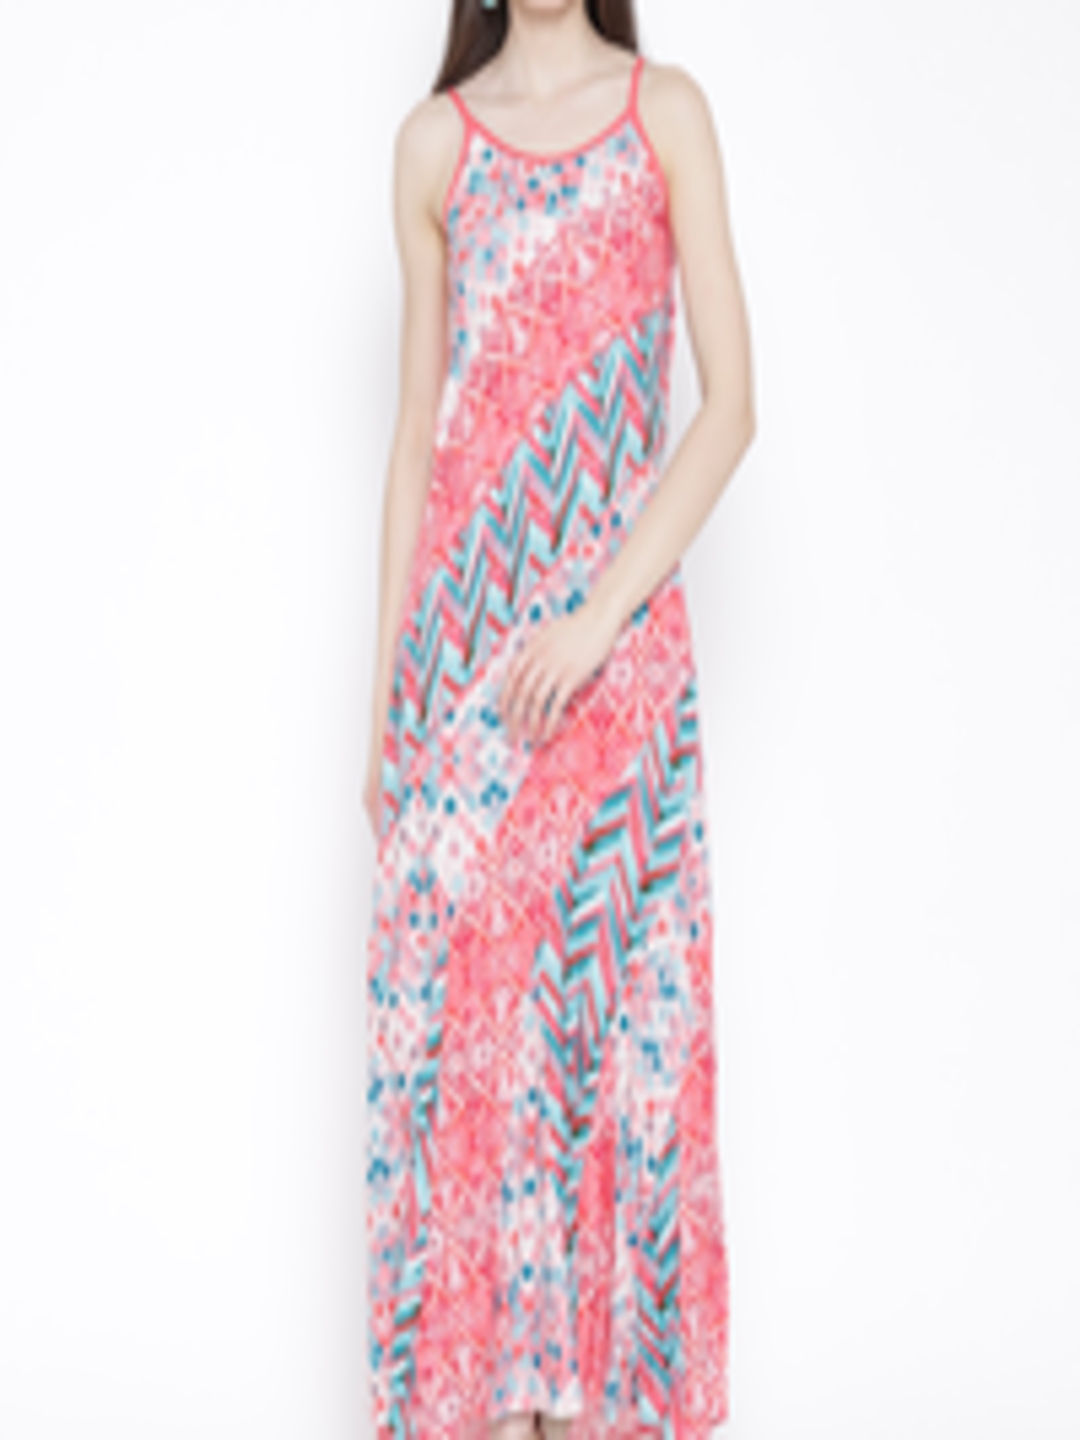 Buy BIBA Coral Red Printed Maxi Dress - Dresses for Women 1197843 | Myntra